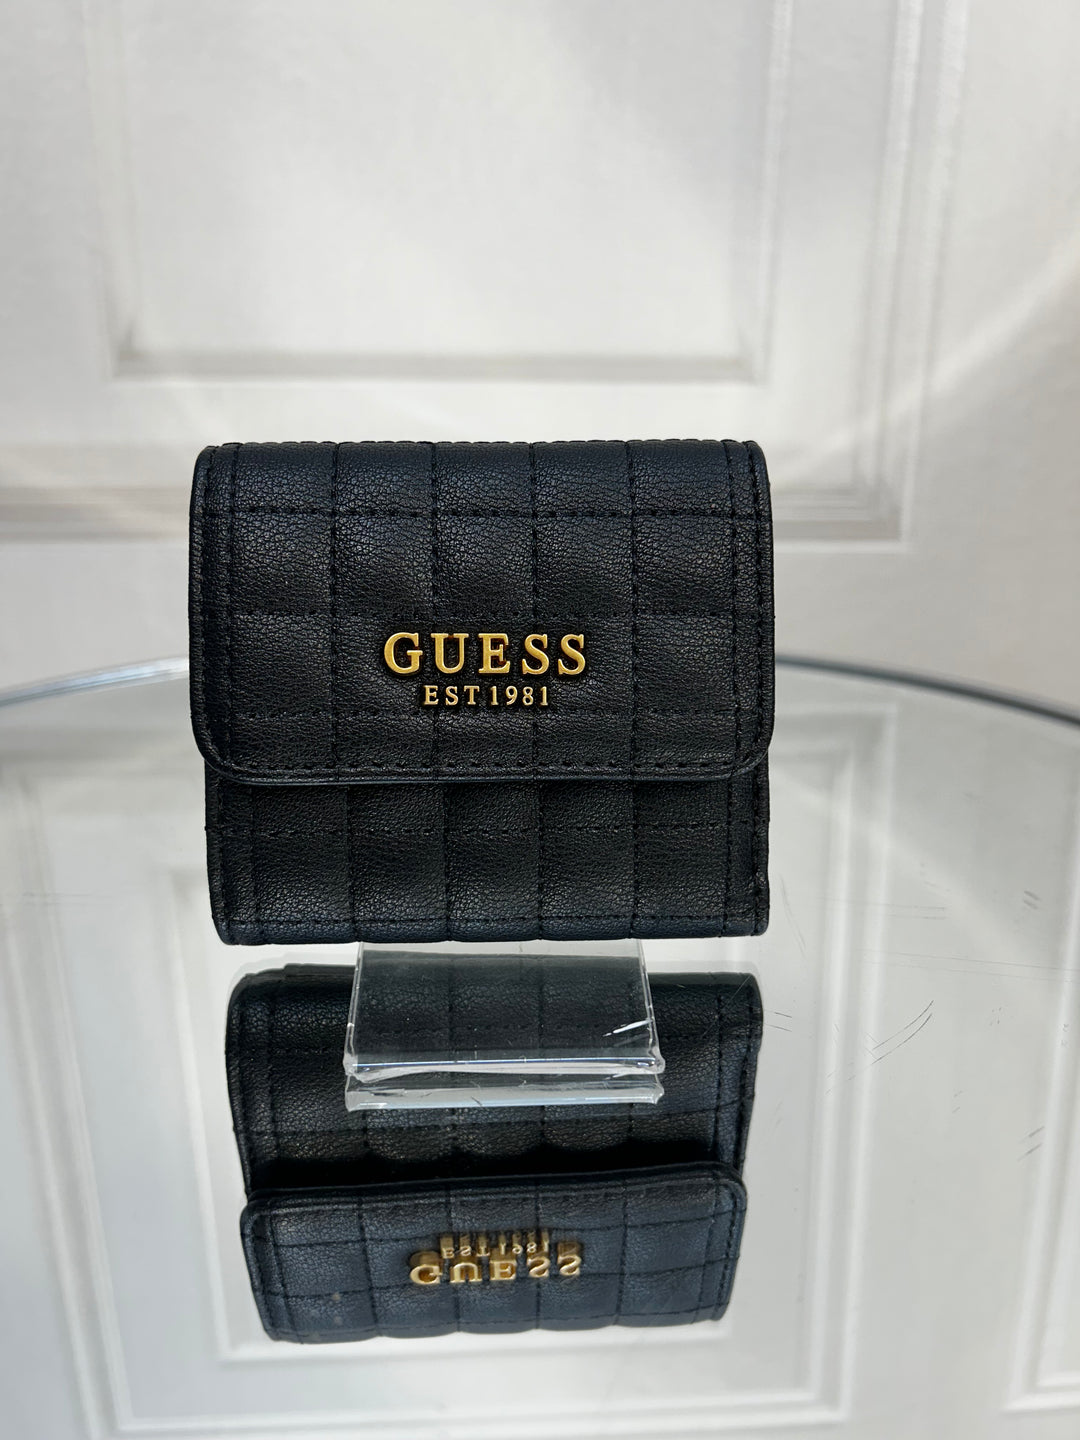 Guess Tia Black Quilted Flapover Purse